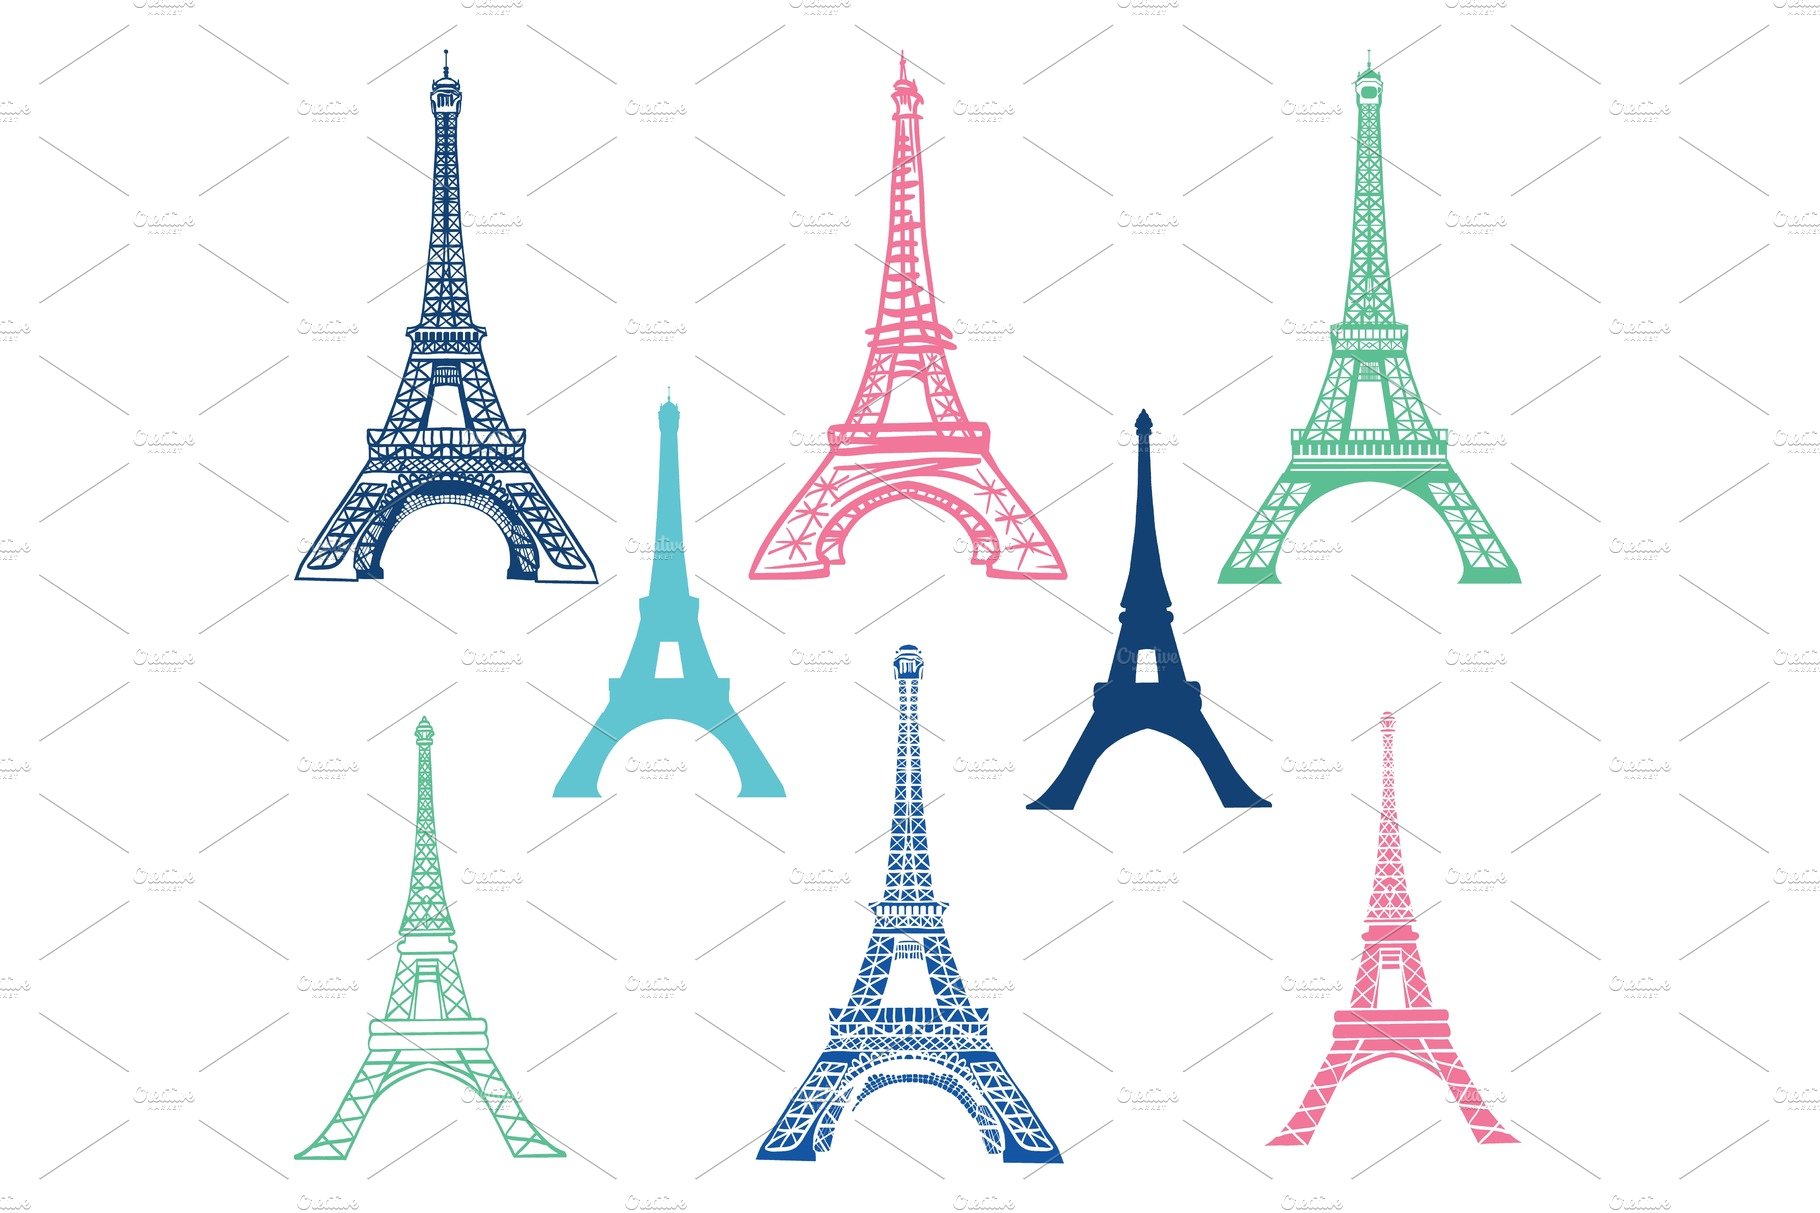 Vector set of different Eiffel Tower landmarks icons of Paris, France with ... cover image.